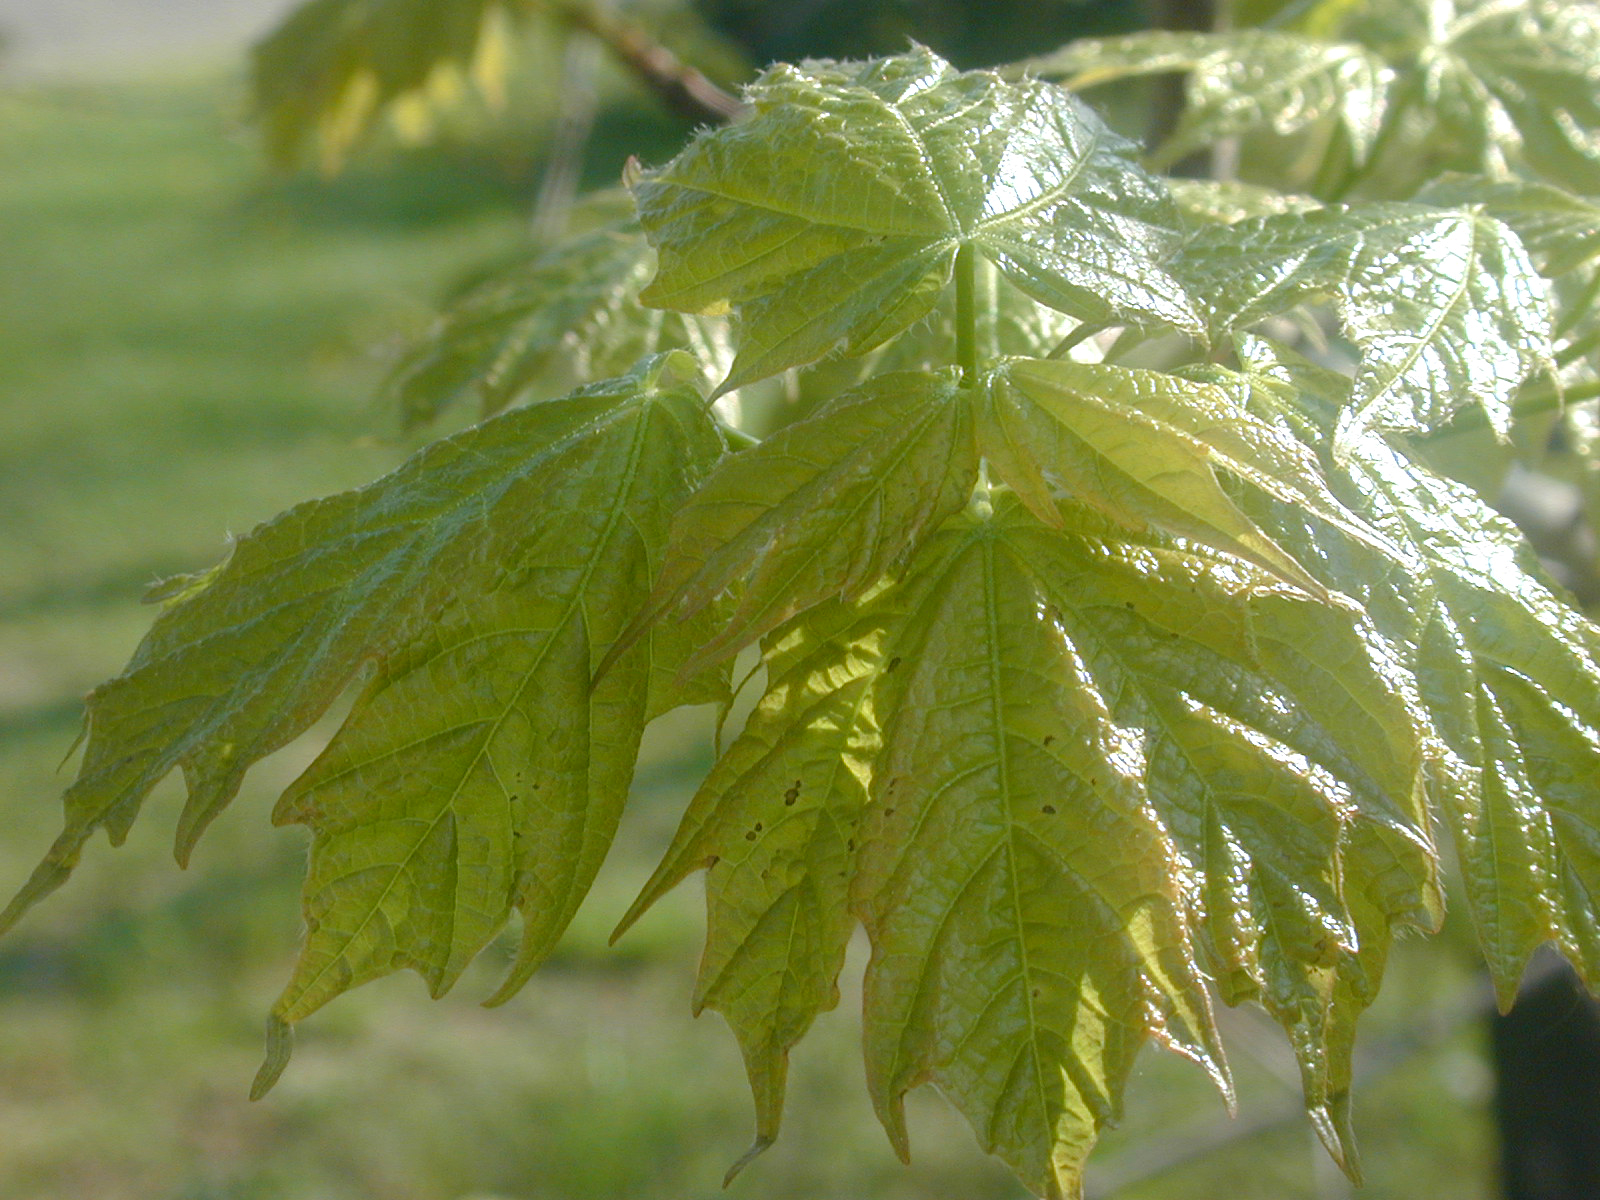 Maple leaves early in the spring